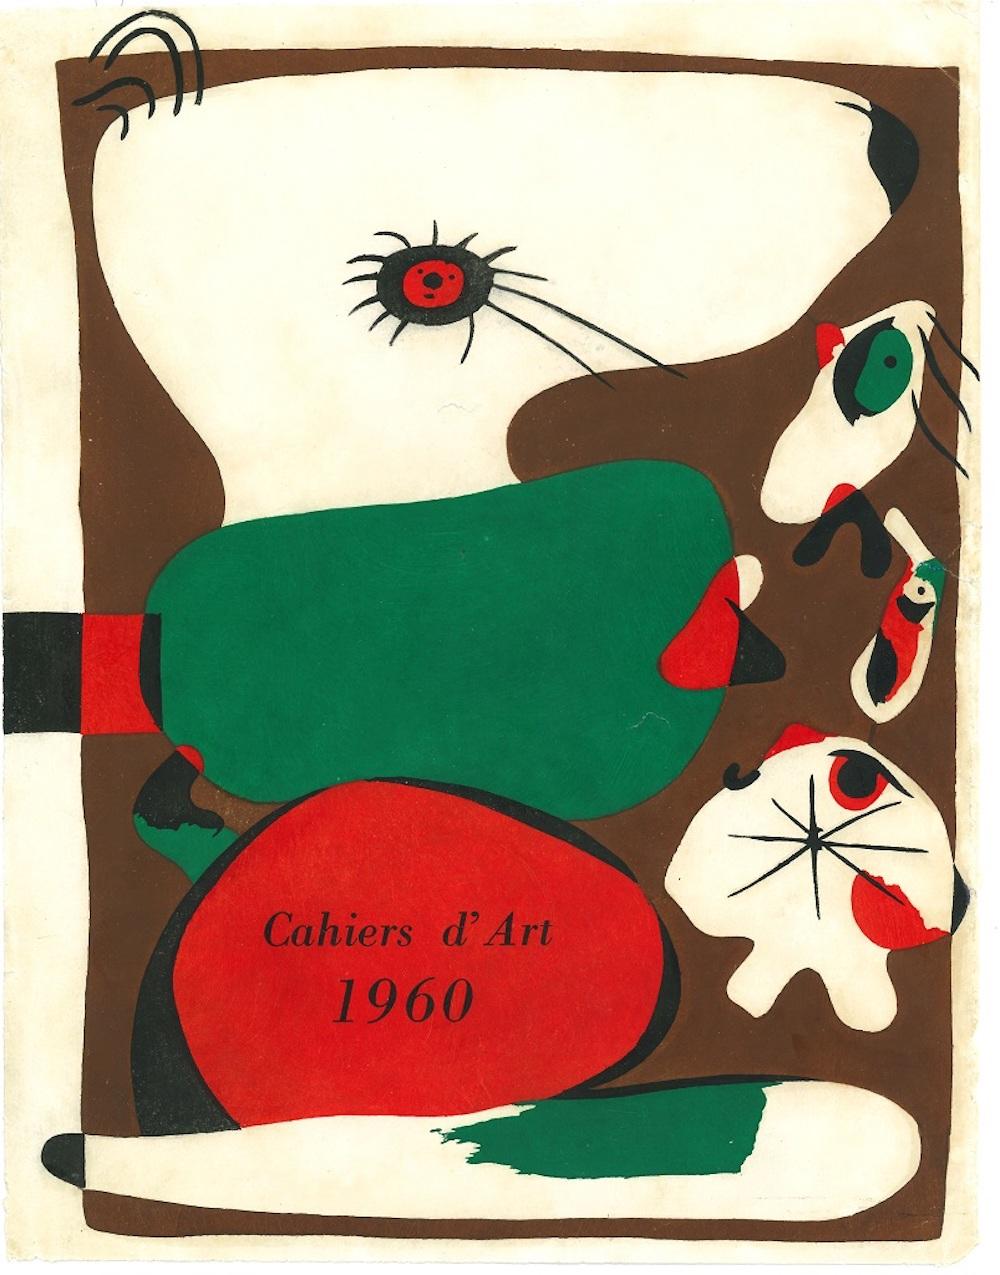 Joan Miró Abstract Print - Frontispiece for Cahiers d'Art - Lithograph by J. Mirò - 1960